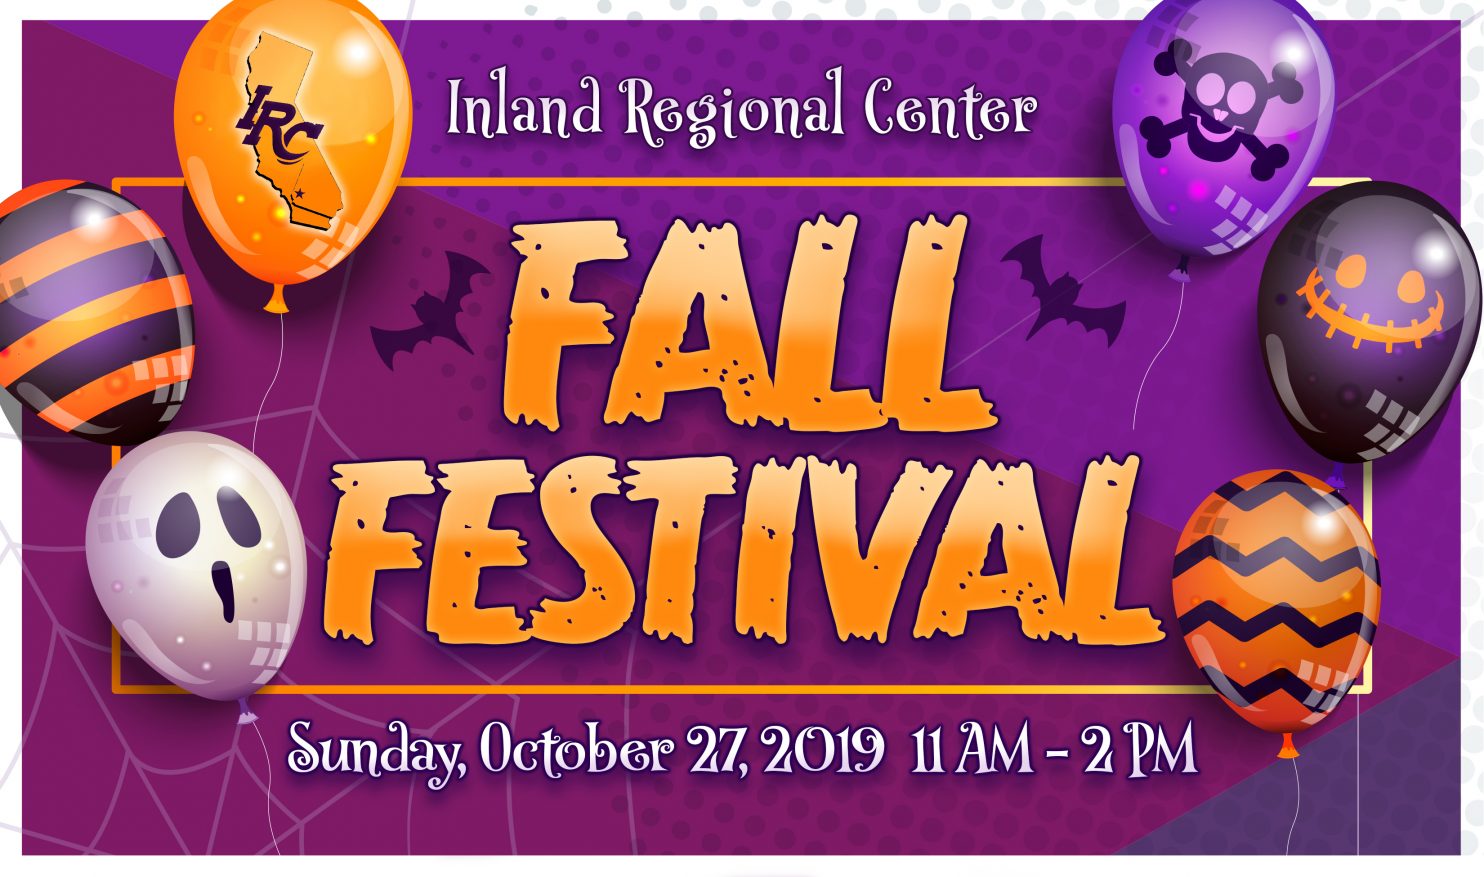 IRC Fall Festival comes to Riverside Inland Regional Center